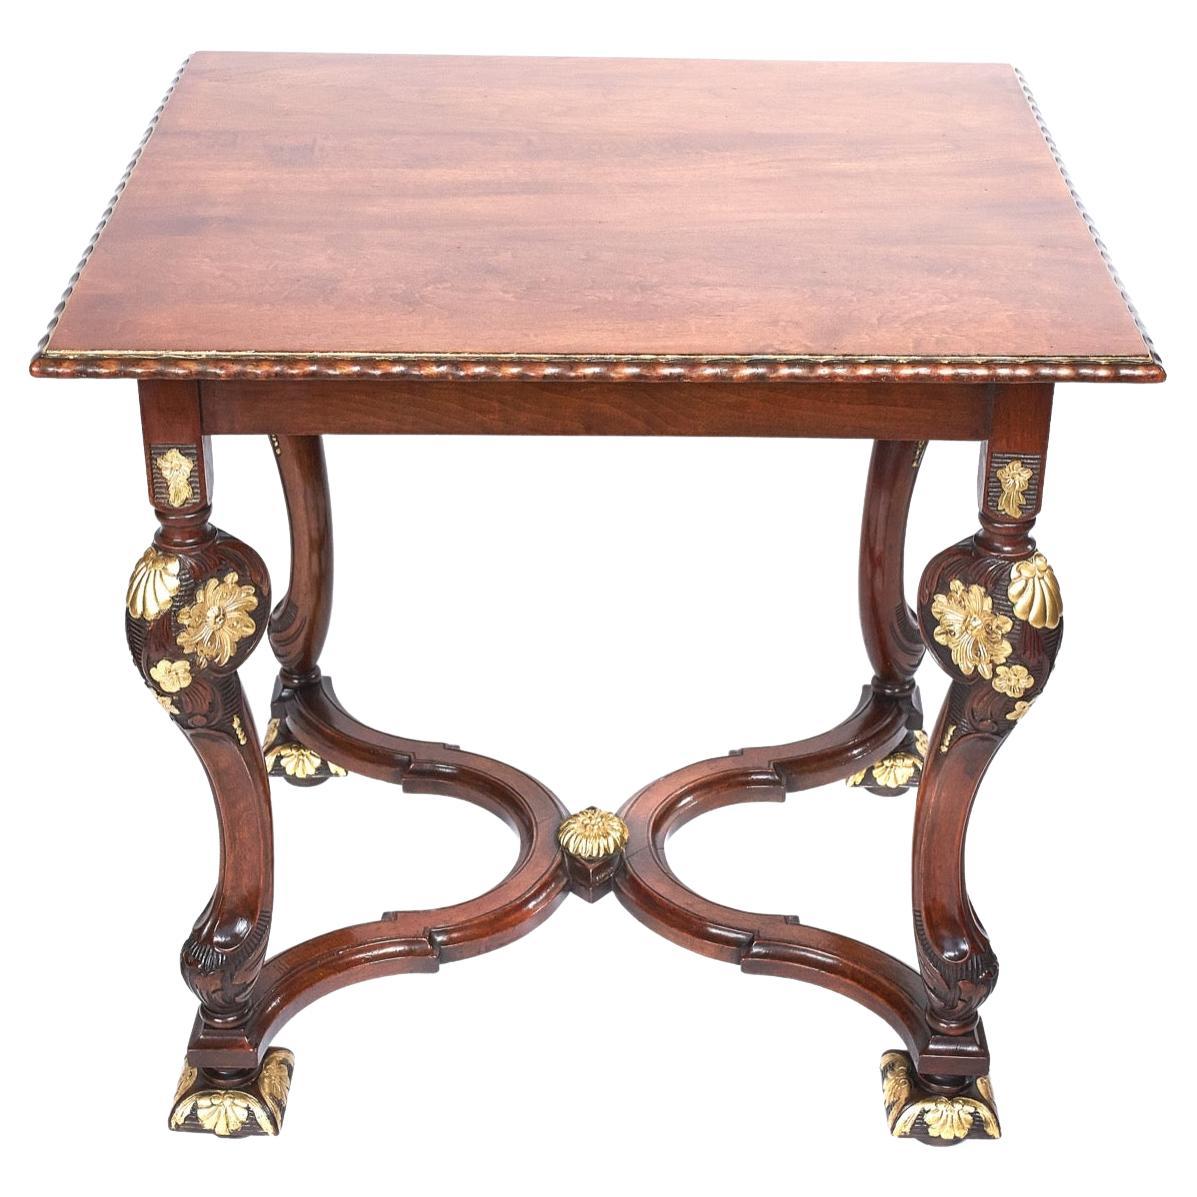 William & Mary Revival Walnut Centre Table with Parcel Gilt Decoration